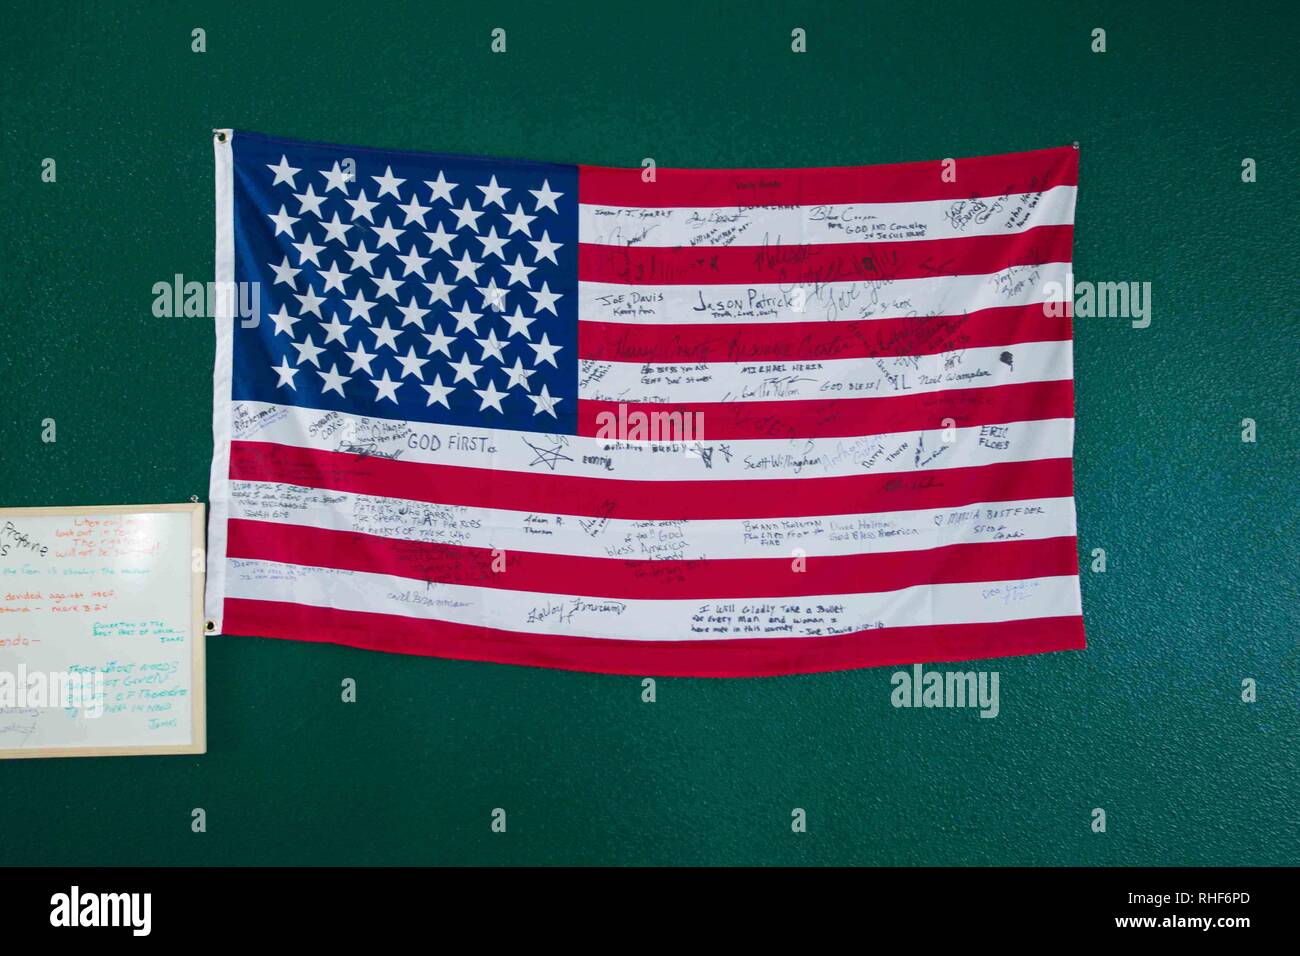 Flag hanging in the bunkhouse of the Malheur National Wildlife Refuge during the 'Bundy Occupation' signed by all of the occupiers and some vistors. Stock Photo